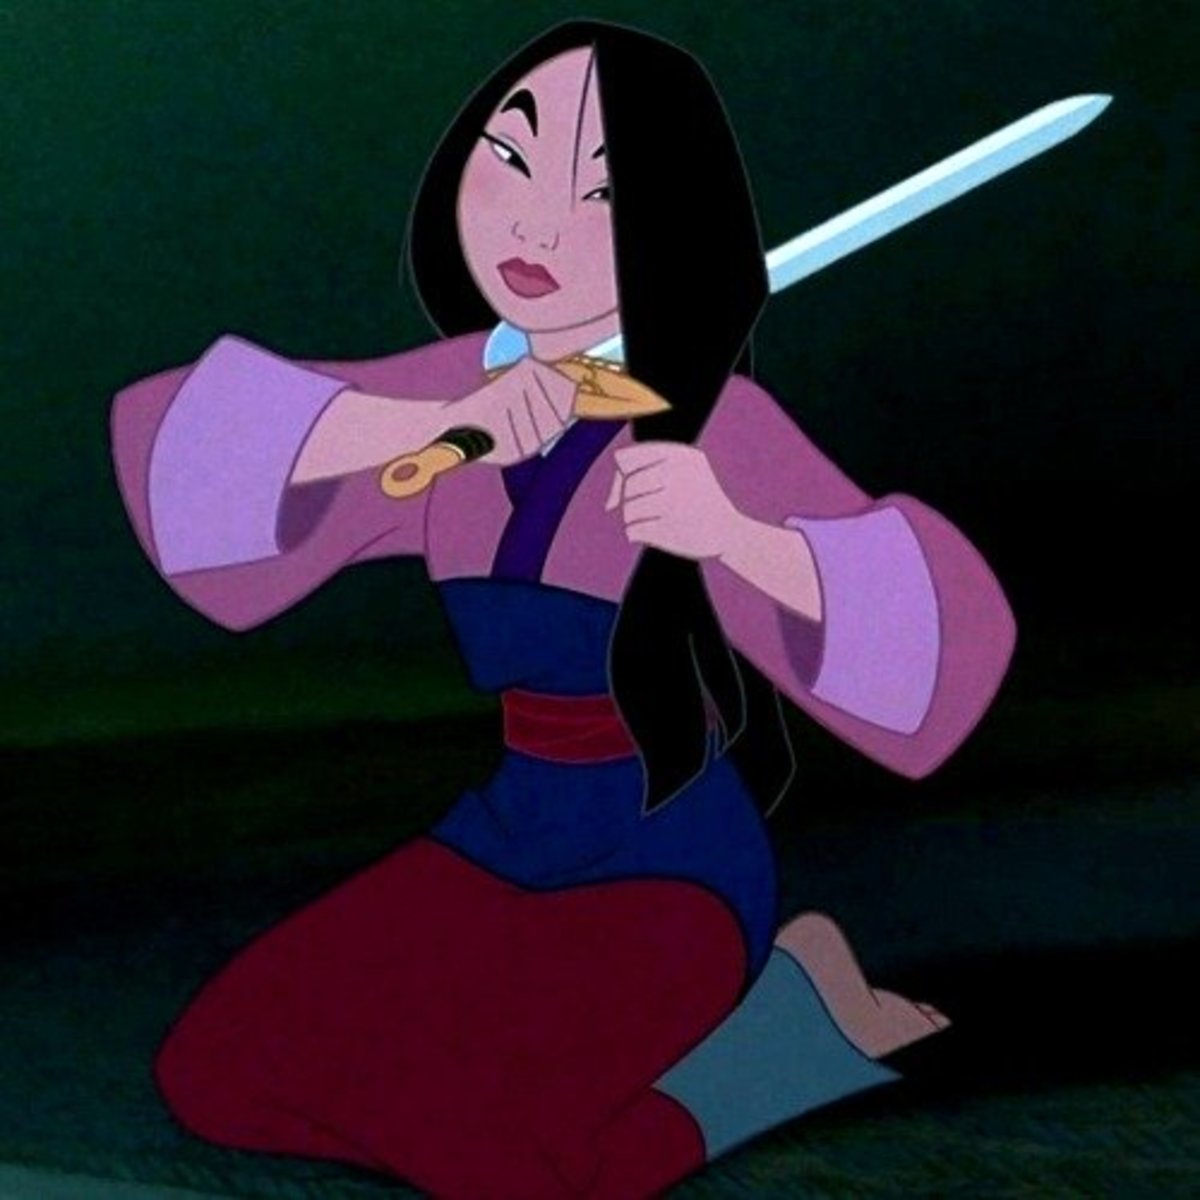 Mulan does not require rules.